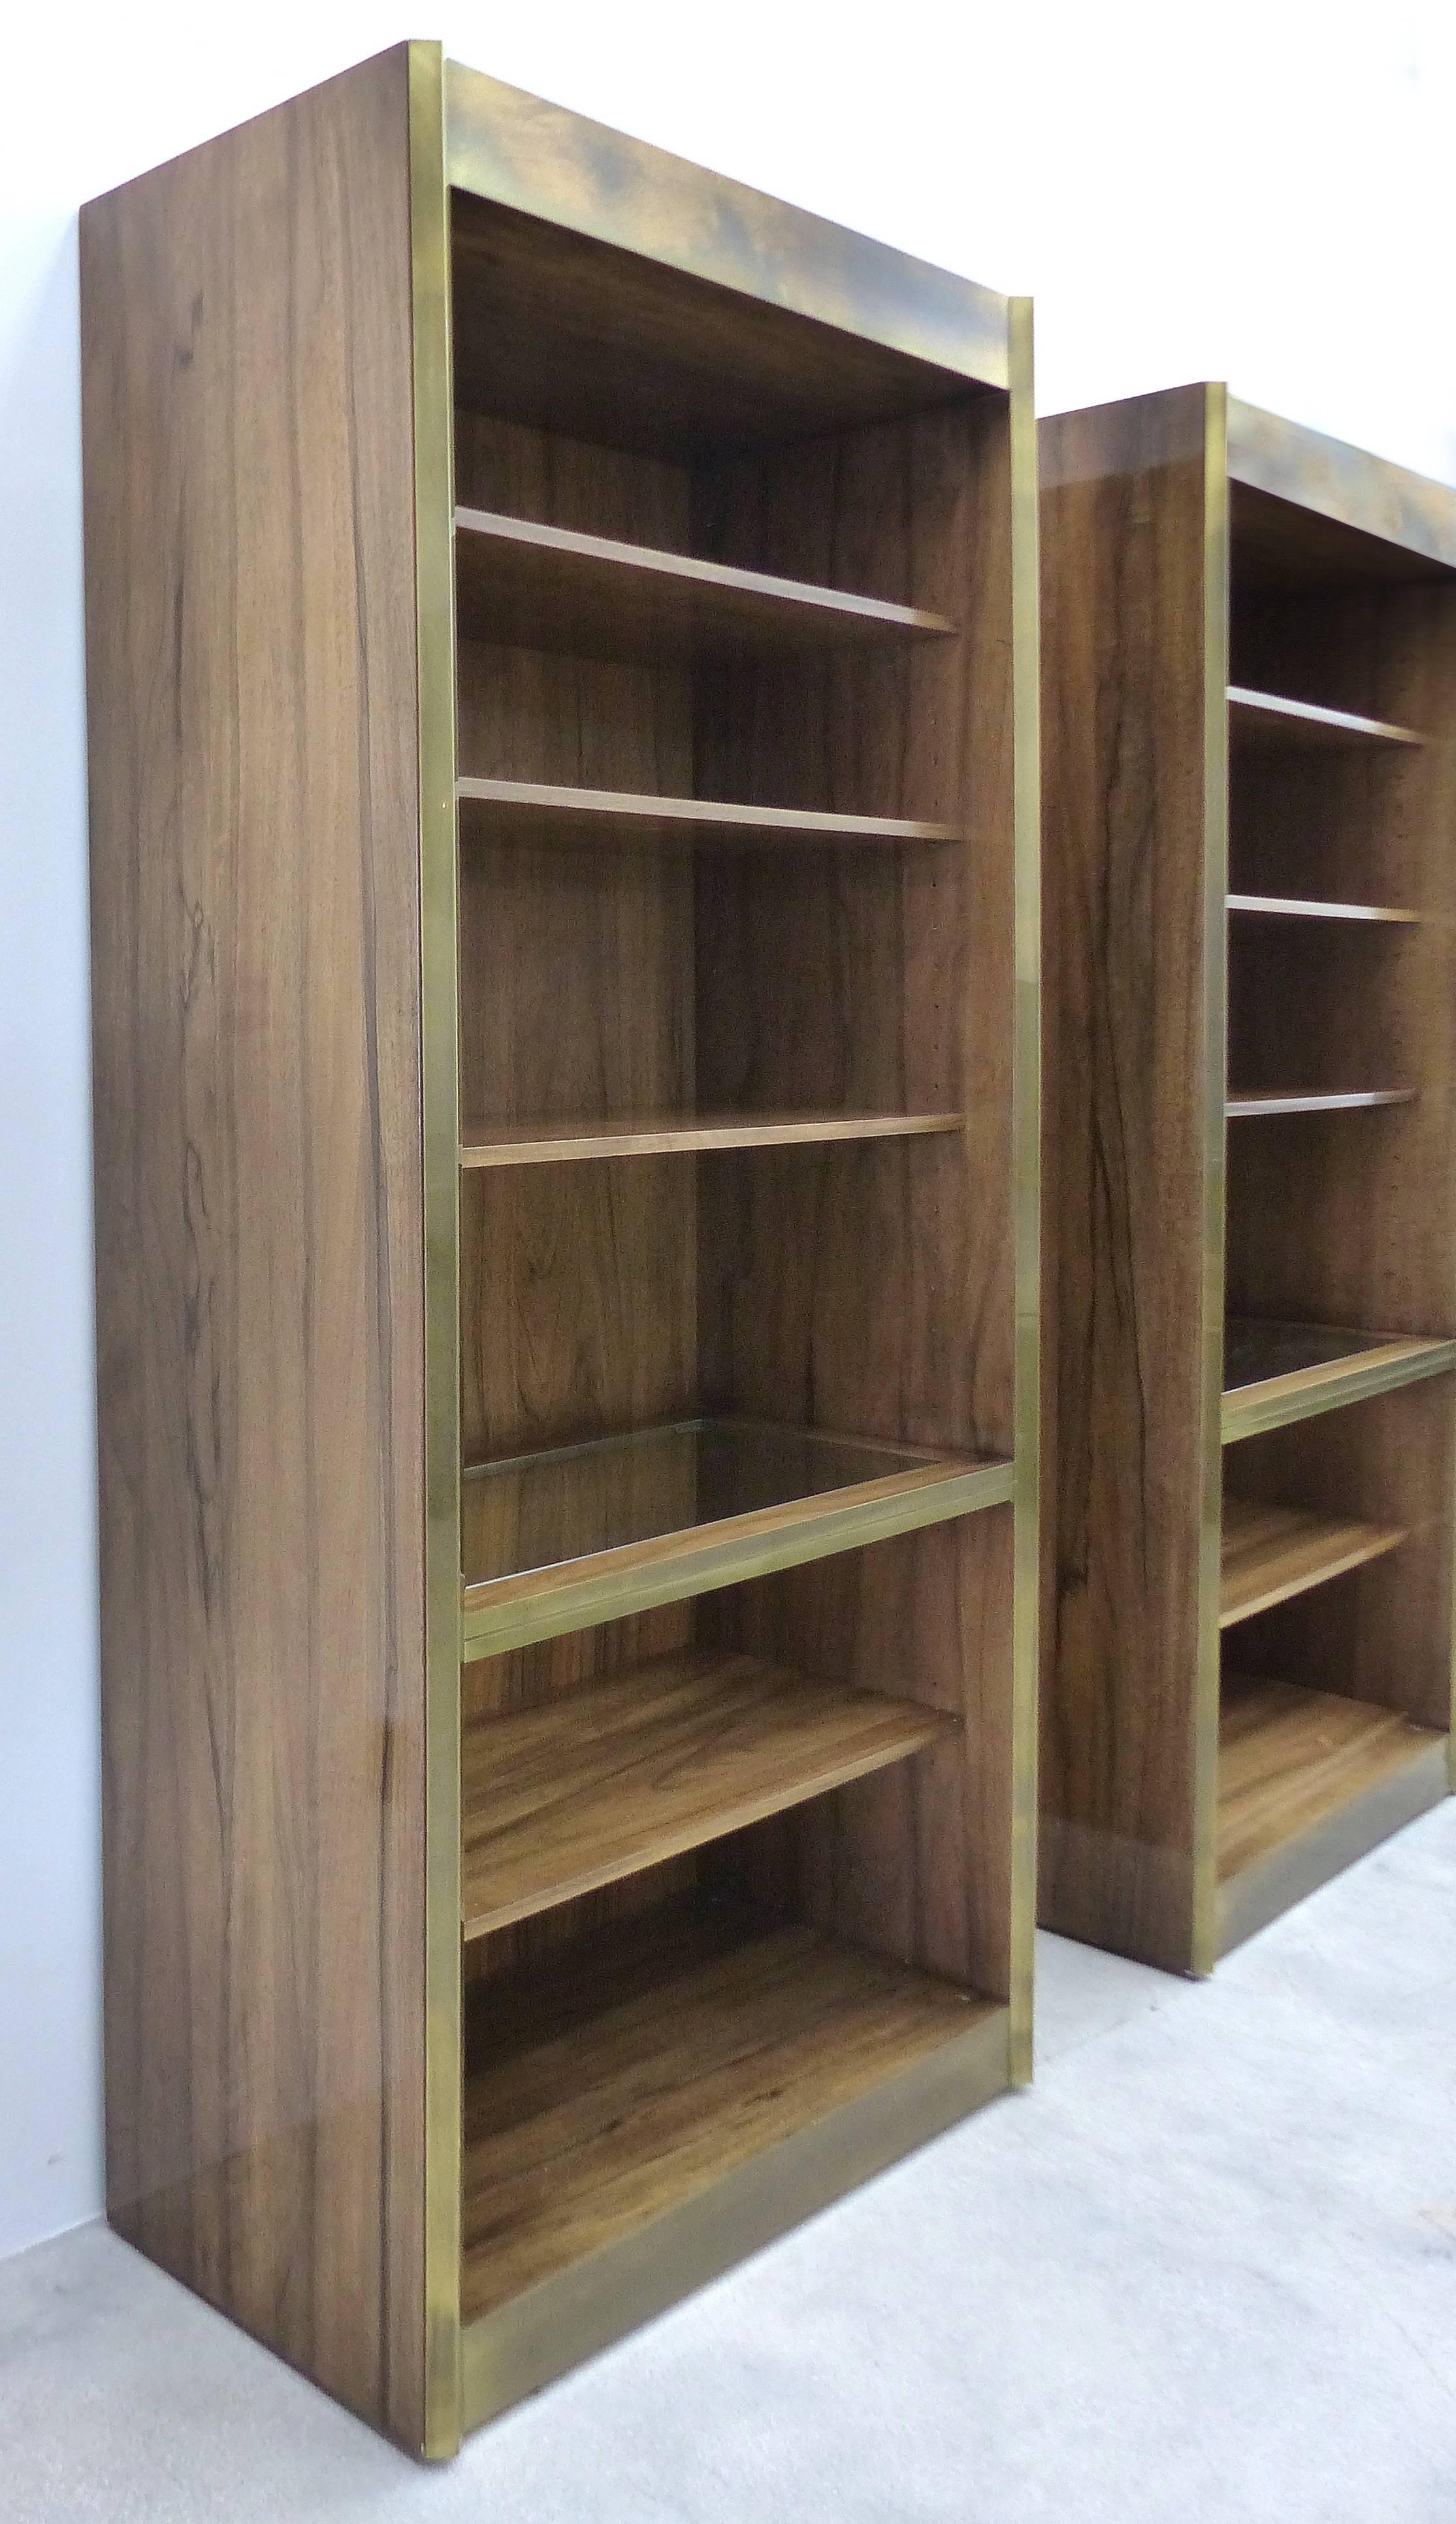 

A pair of fine quality rosewood and brass trimmed bookcases by Mastercraft. Edged in angled brass with matching panels top and bottom, each bookcase has five shelves with one having an inset glass panel. Maker's mark on the back. The brass has a